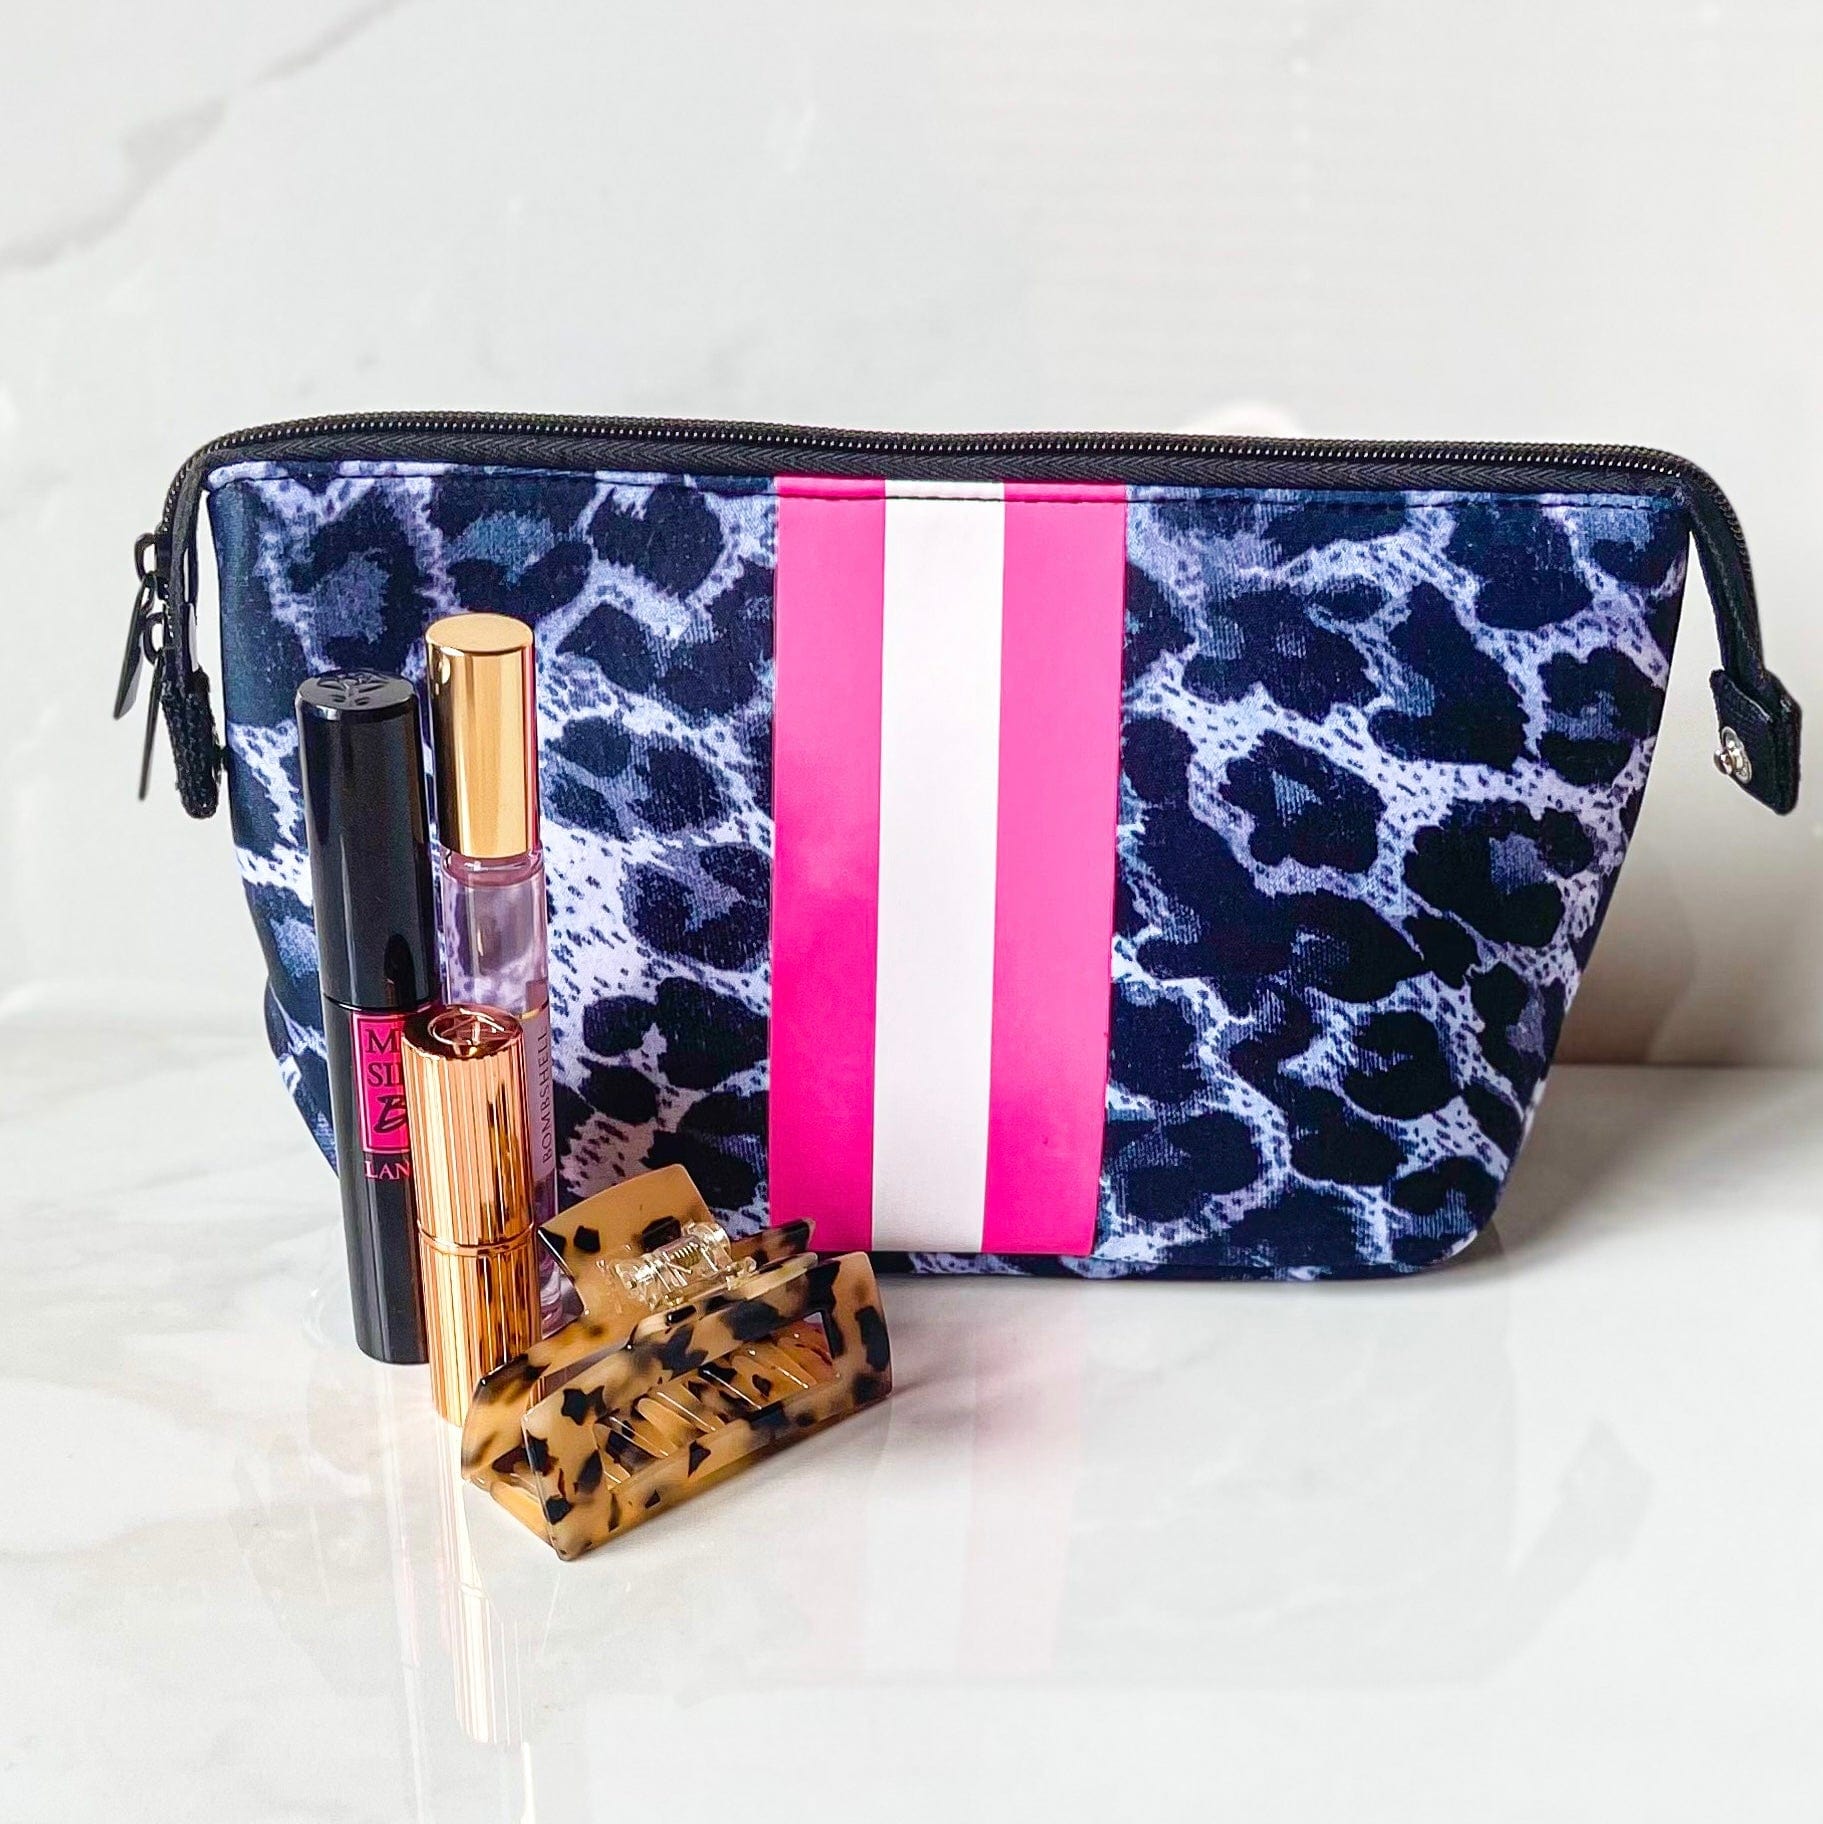 How To Organize All Your Products Into Makeup Bags | Into The Gloss